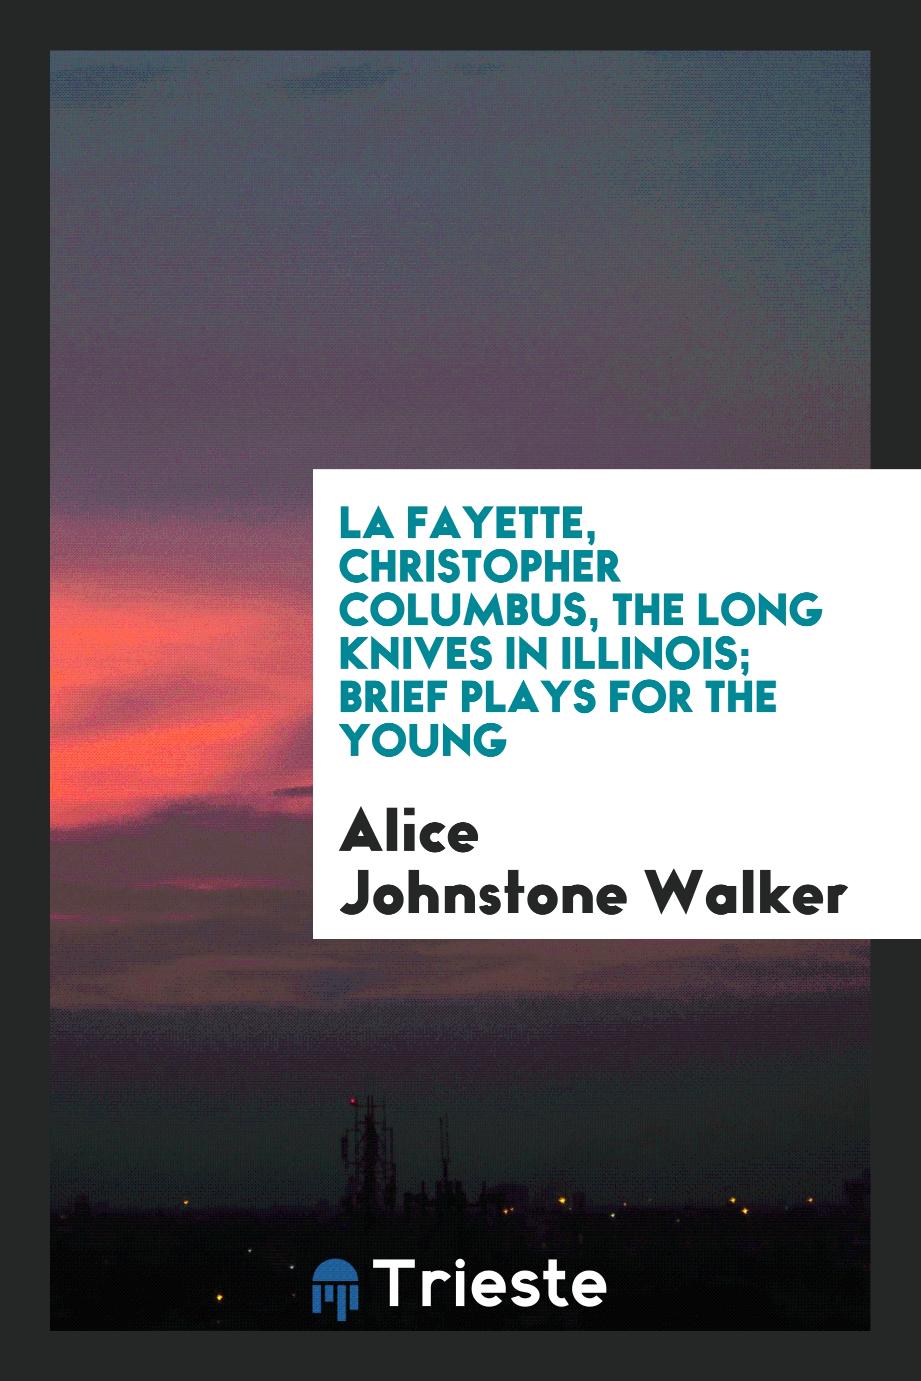 La Fayette, Christopher Columbus, The Long knives in Illinois; brief plays for the young